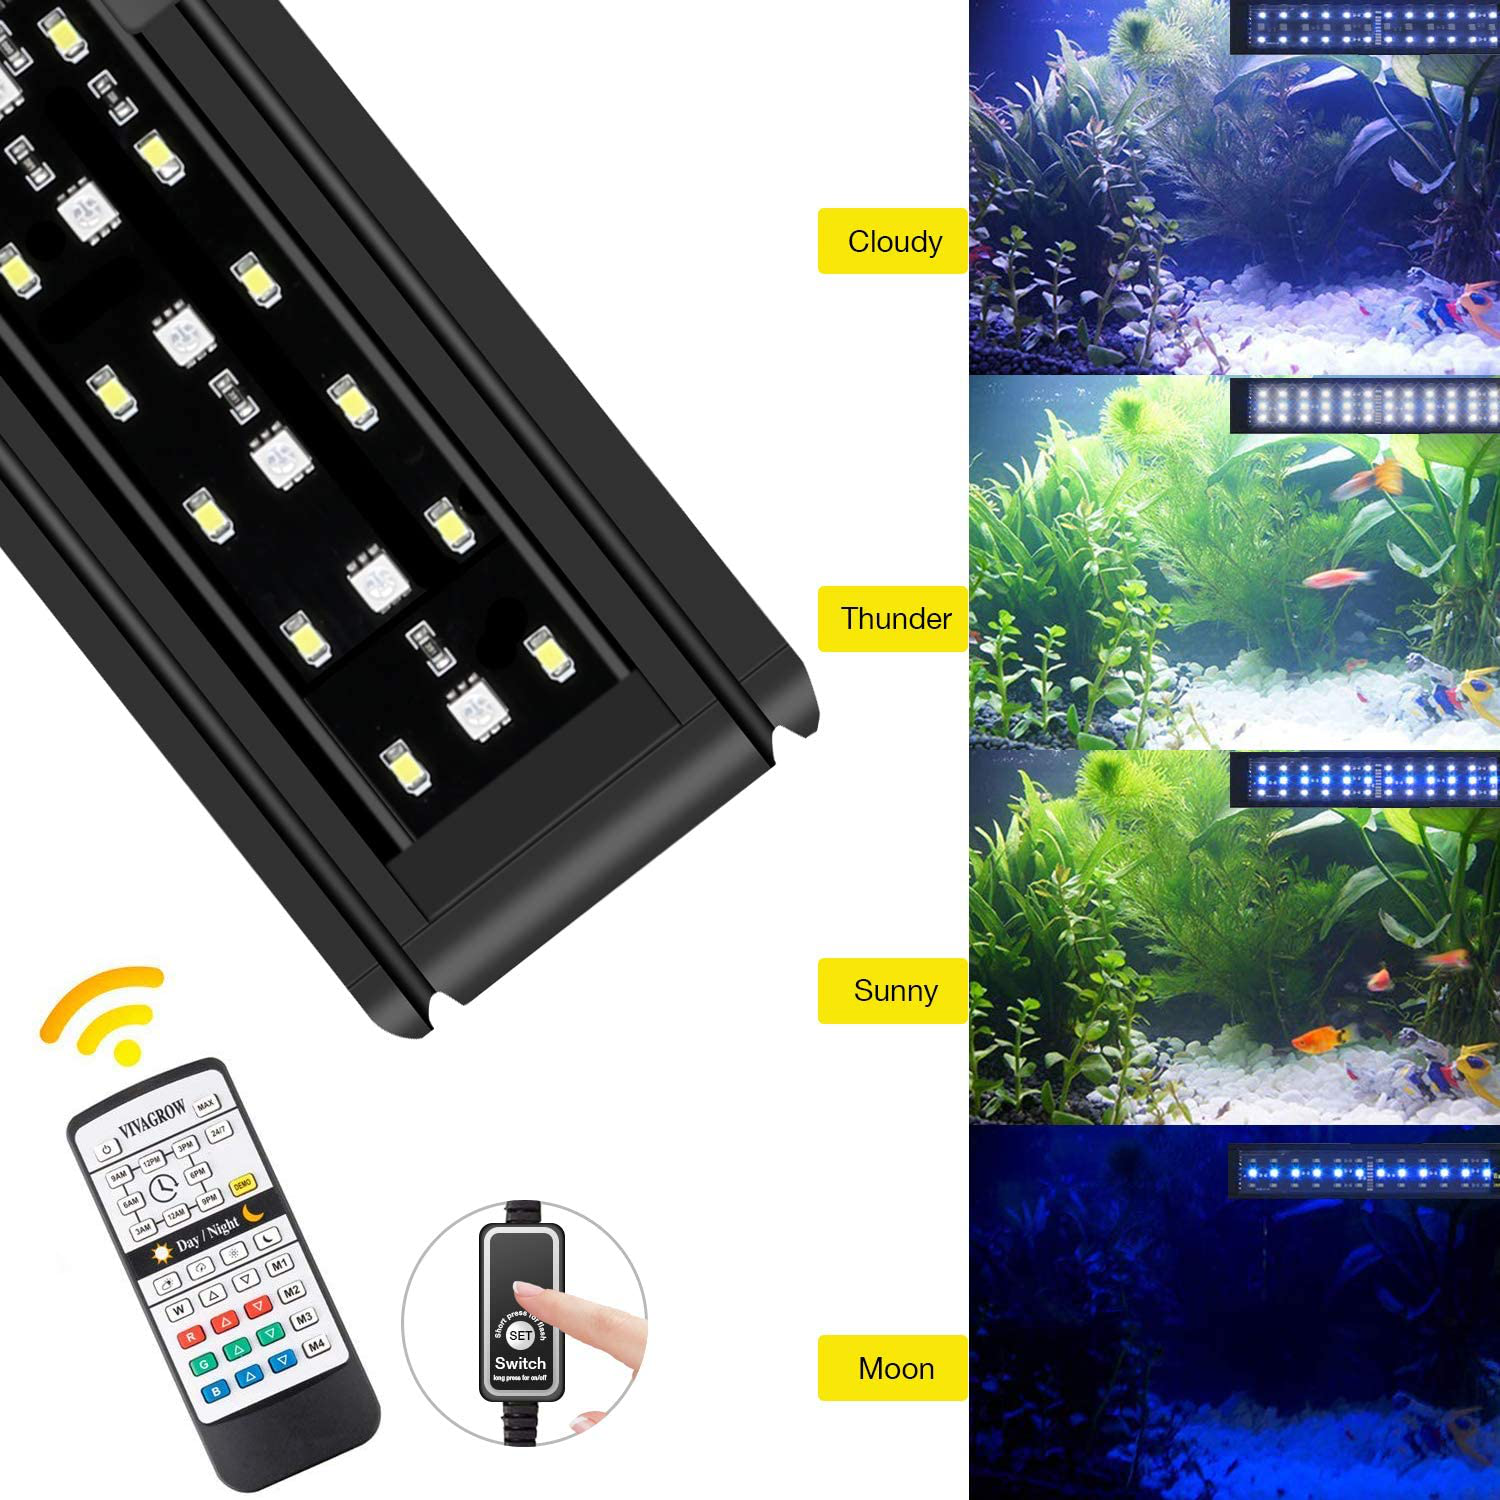 IREENUO Aquarium LED Light, Full Spectrum Fish Tank Clip on Light with Remote, Color Changing Lighting for Reef Coral Aquatic Plants and Fish Keeping